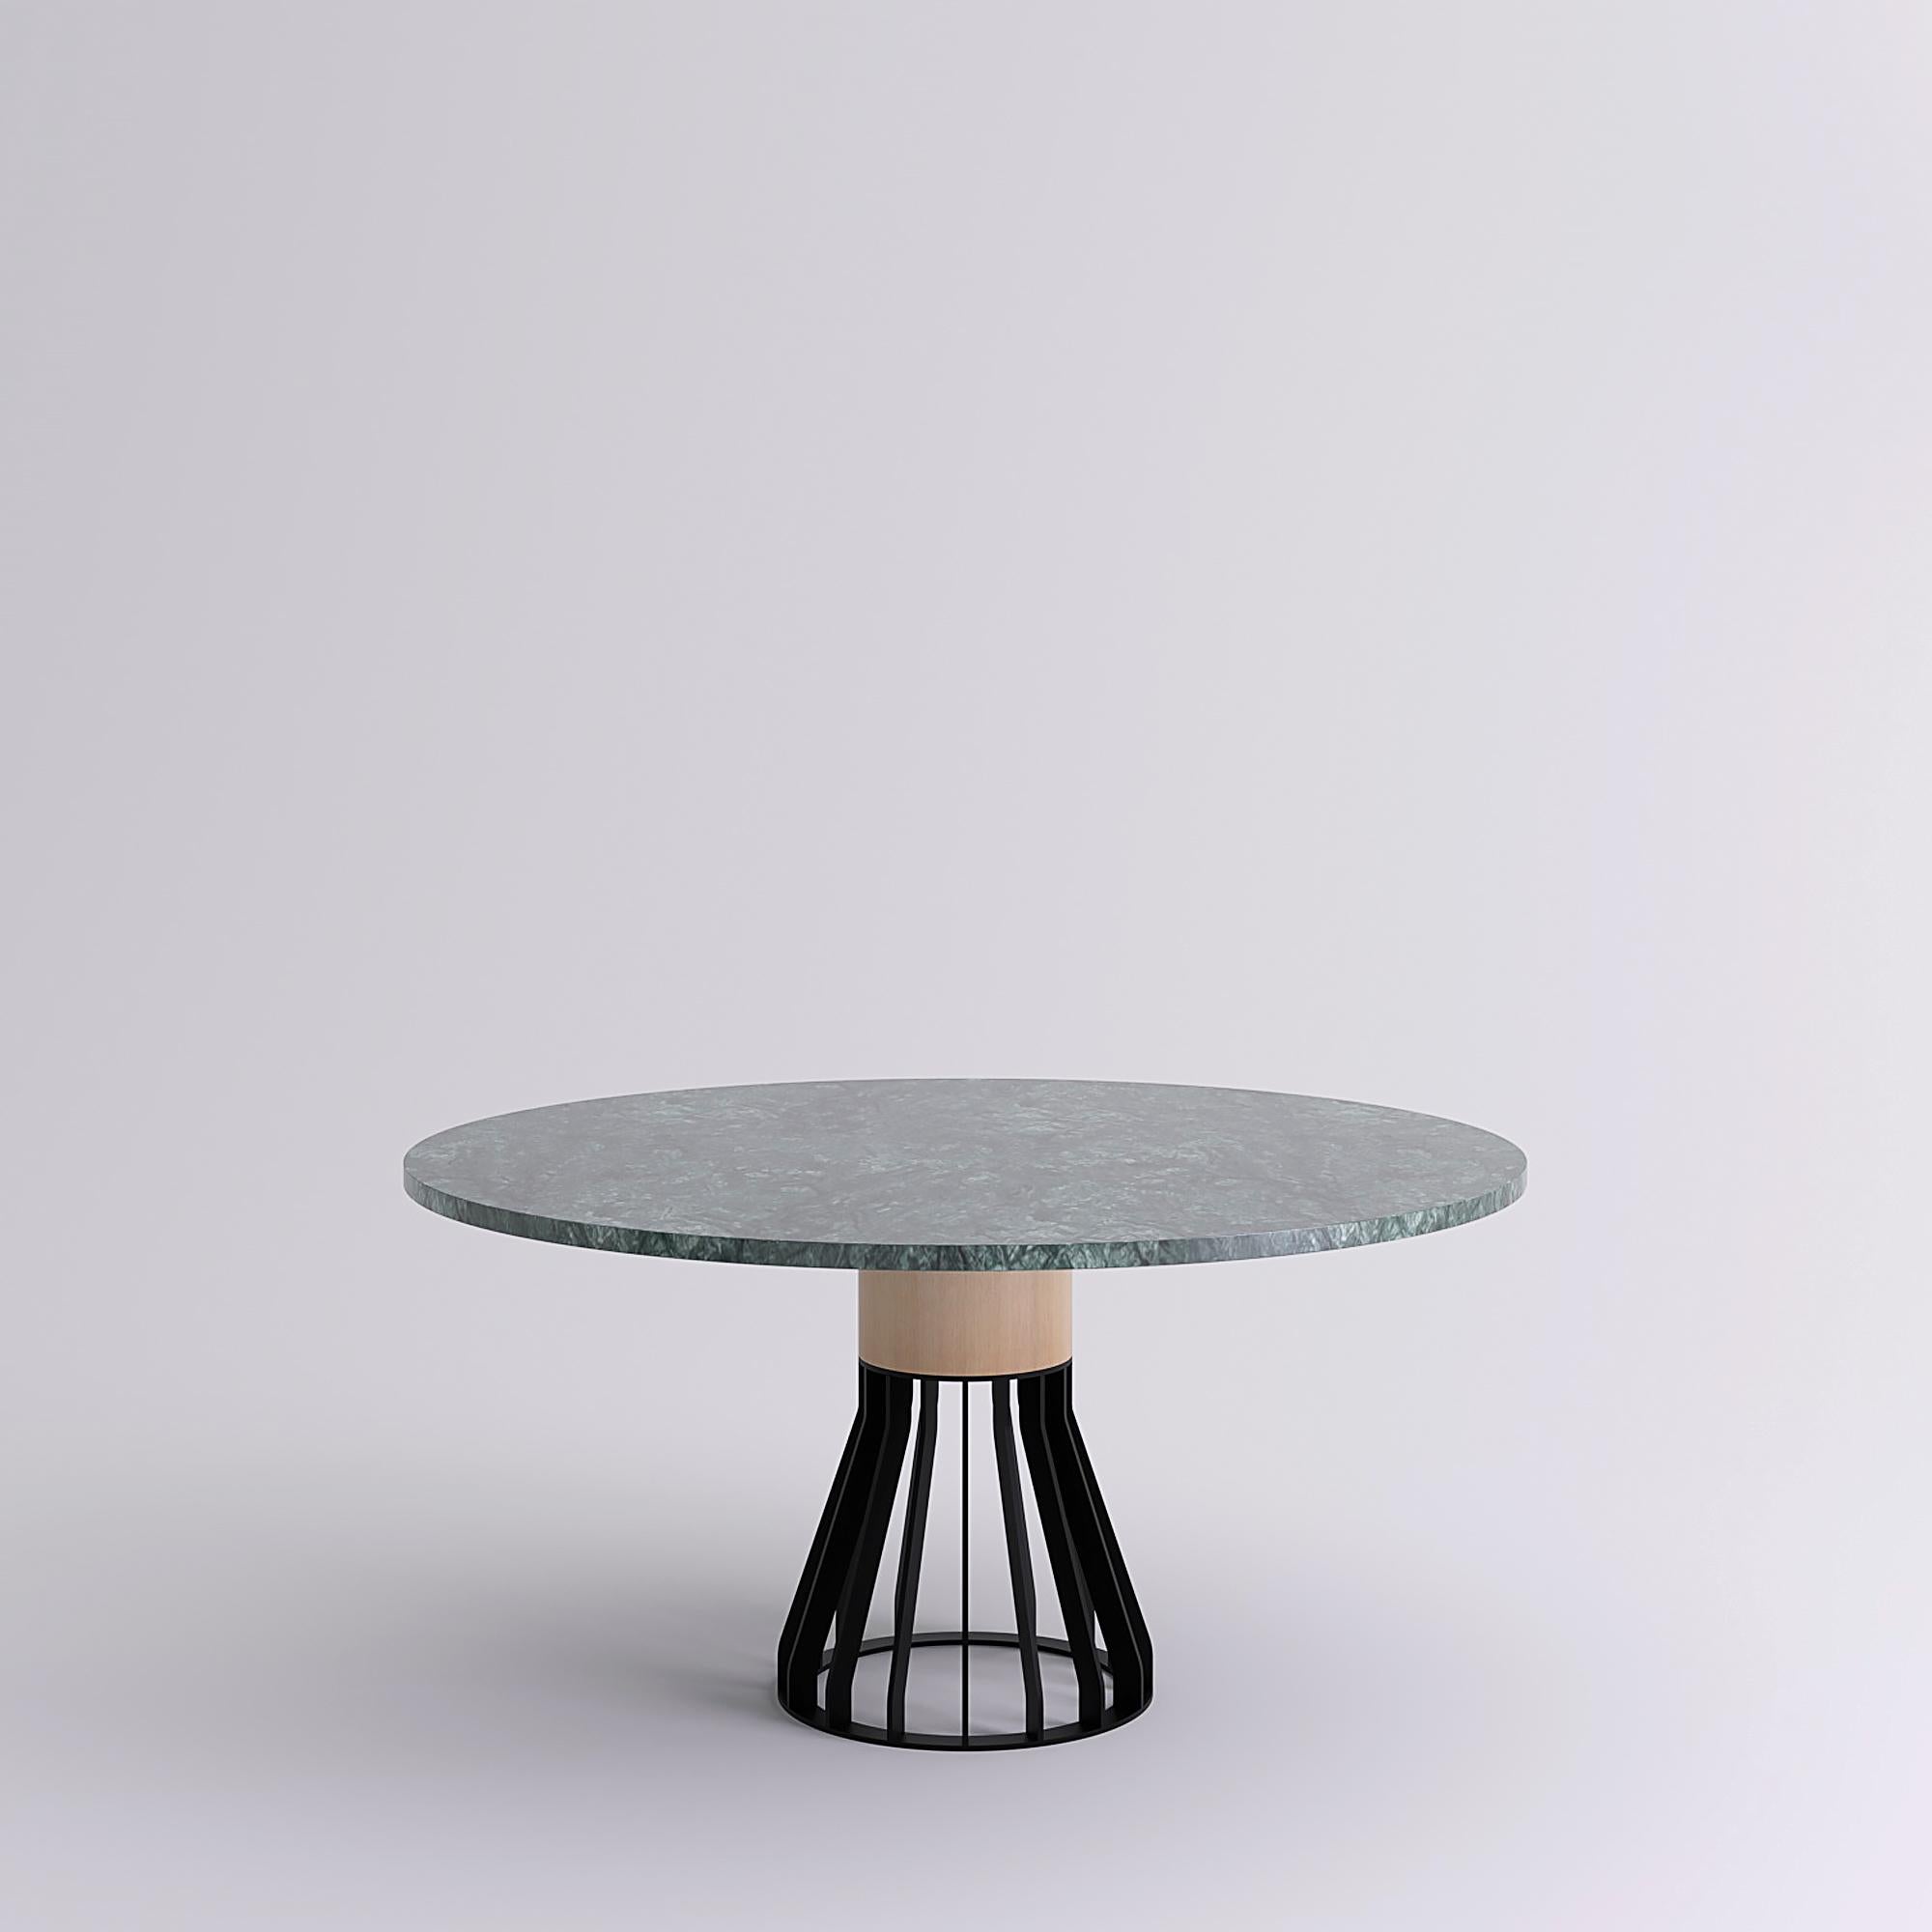 Mewoma is a family of tables with a sculptural presence. Measure: 150cm.
The table combines a laser cut metal base topped by a large wooden column supporting the marble top.
The three materials gave the table its name : metal (ME), wood (WO) and